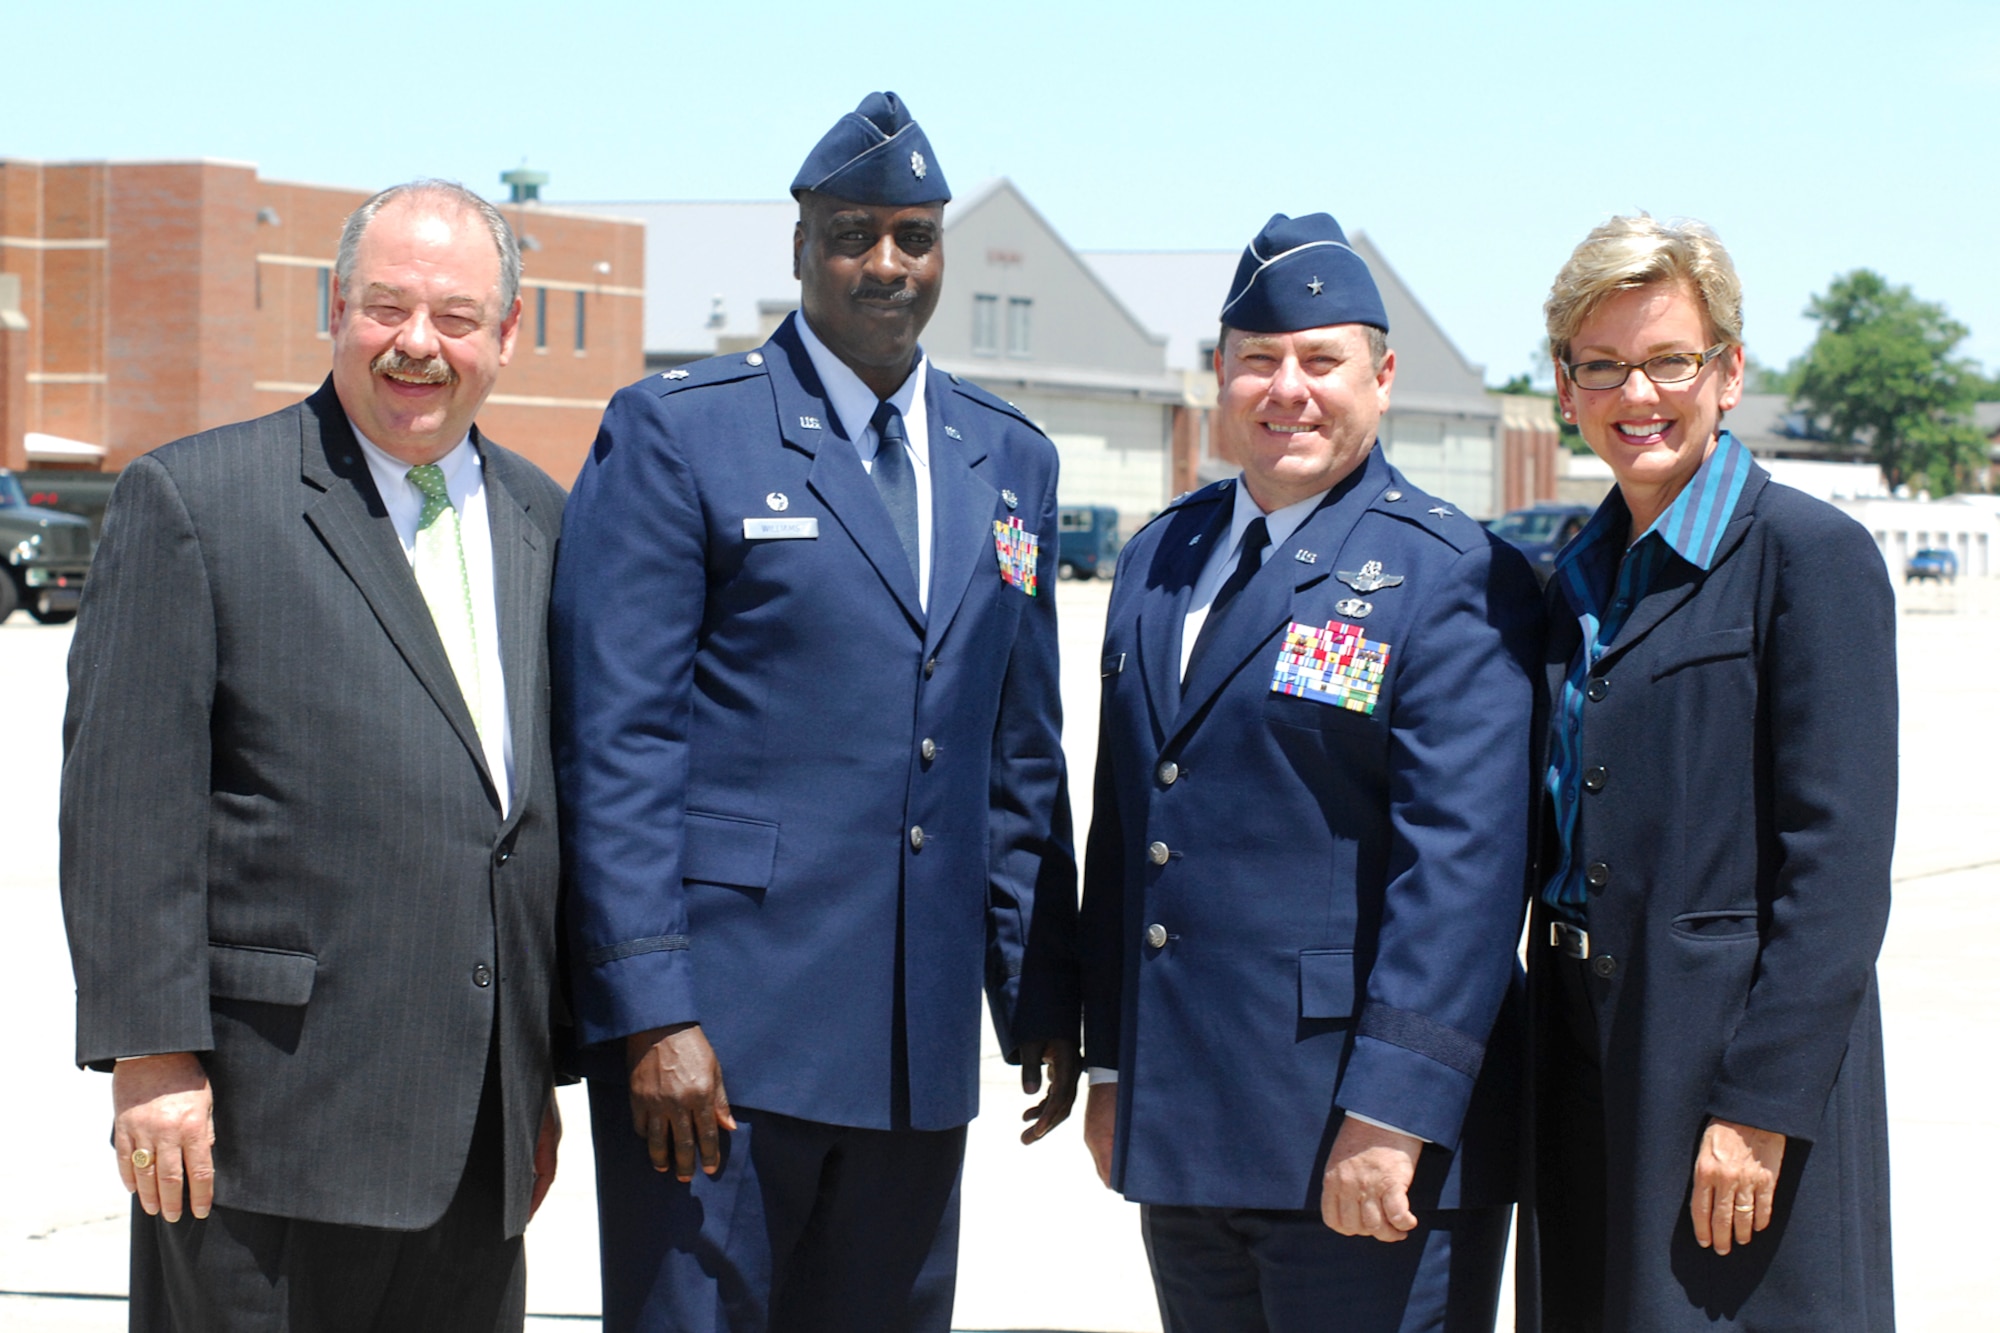 Michigan Governor Jennifer Granholm, Lt. Governor John Cherry, 127th Wing Commander Brig. Gen. Michael Peplinski, and 127th Mission Support Group Commander Lt. Col. Rodney Williams pose for a photo while they awaited the arrival the President at Selfridge Air National Guard Base.  Air Force One landed at Selfridge Air National Guard Base on Tuesday, July 14,  with the President and Senator Debbie Stabenow, on his way to a public appearance at Macomb County Community College in Warren, Mich., where he announced his American Graduation Initiative.  (USAF photo by John S. Swanson)